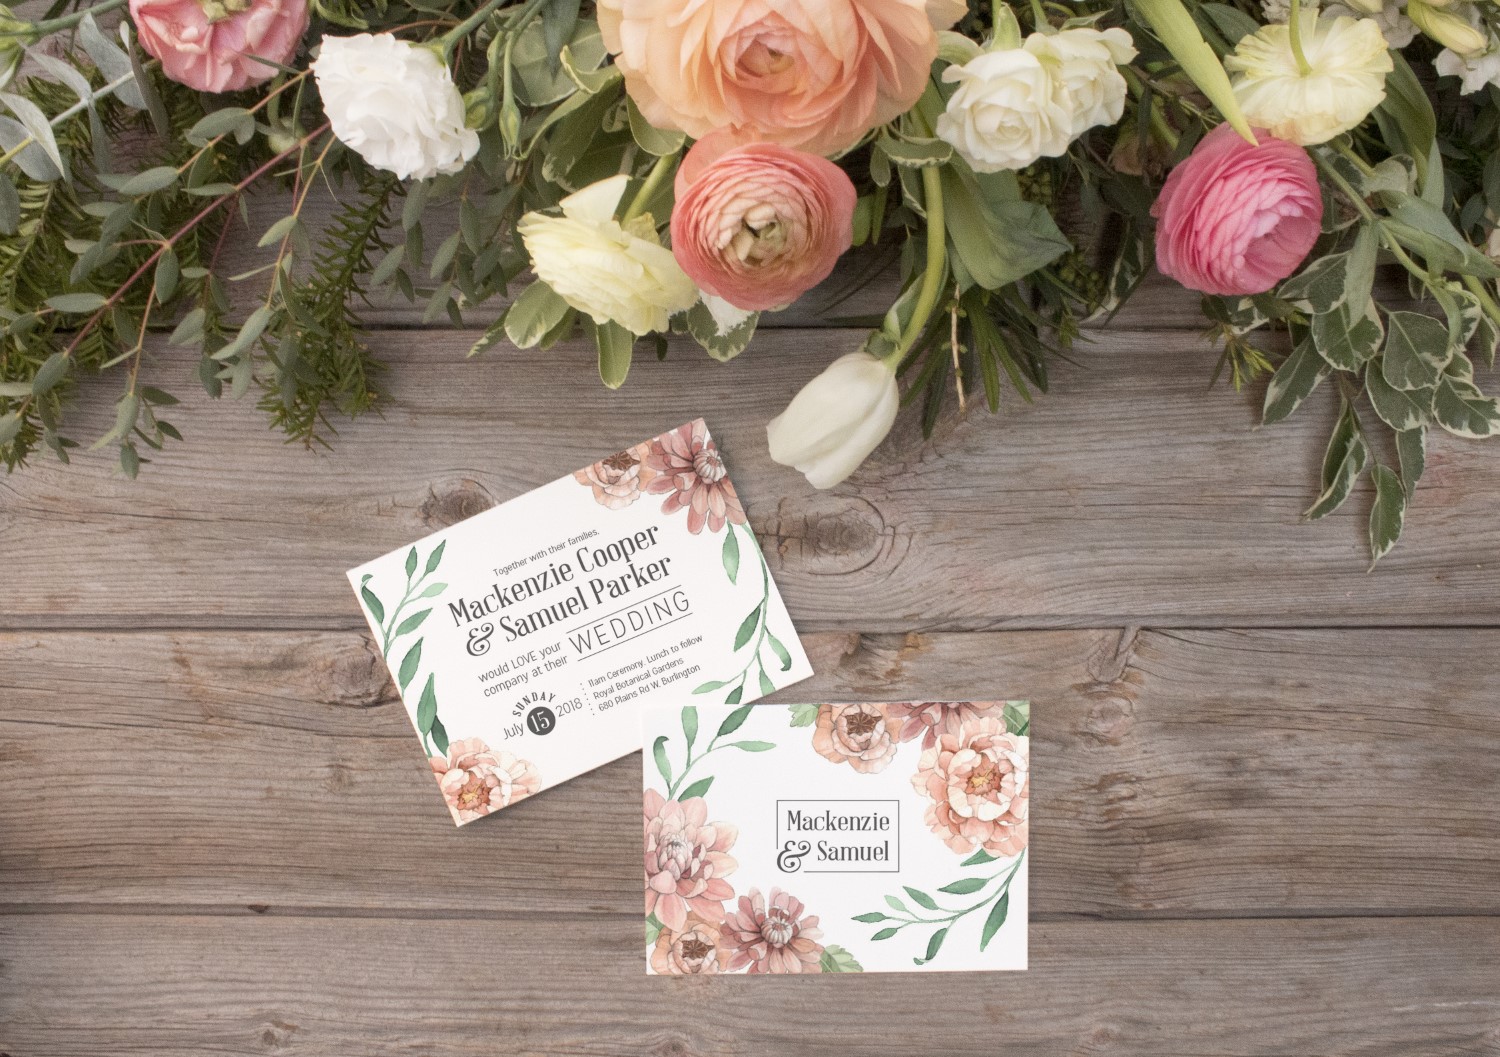 Blush Botanical and Vine Watercolour Wedding Invitations and Stationery by Alicia's Infinity - www.aliciasinfinity.com